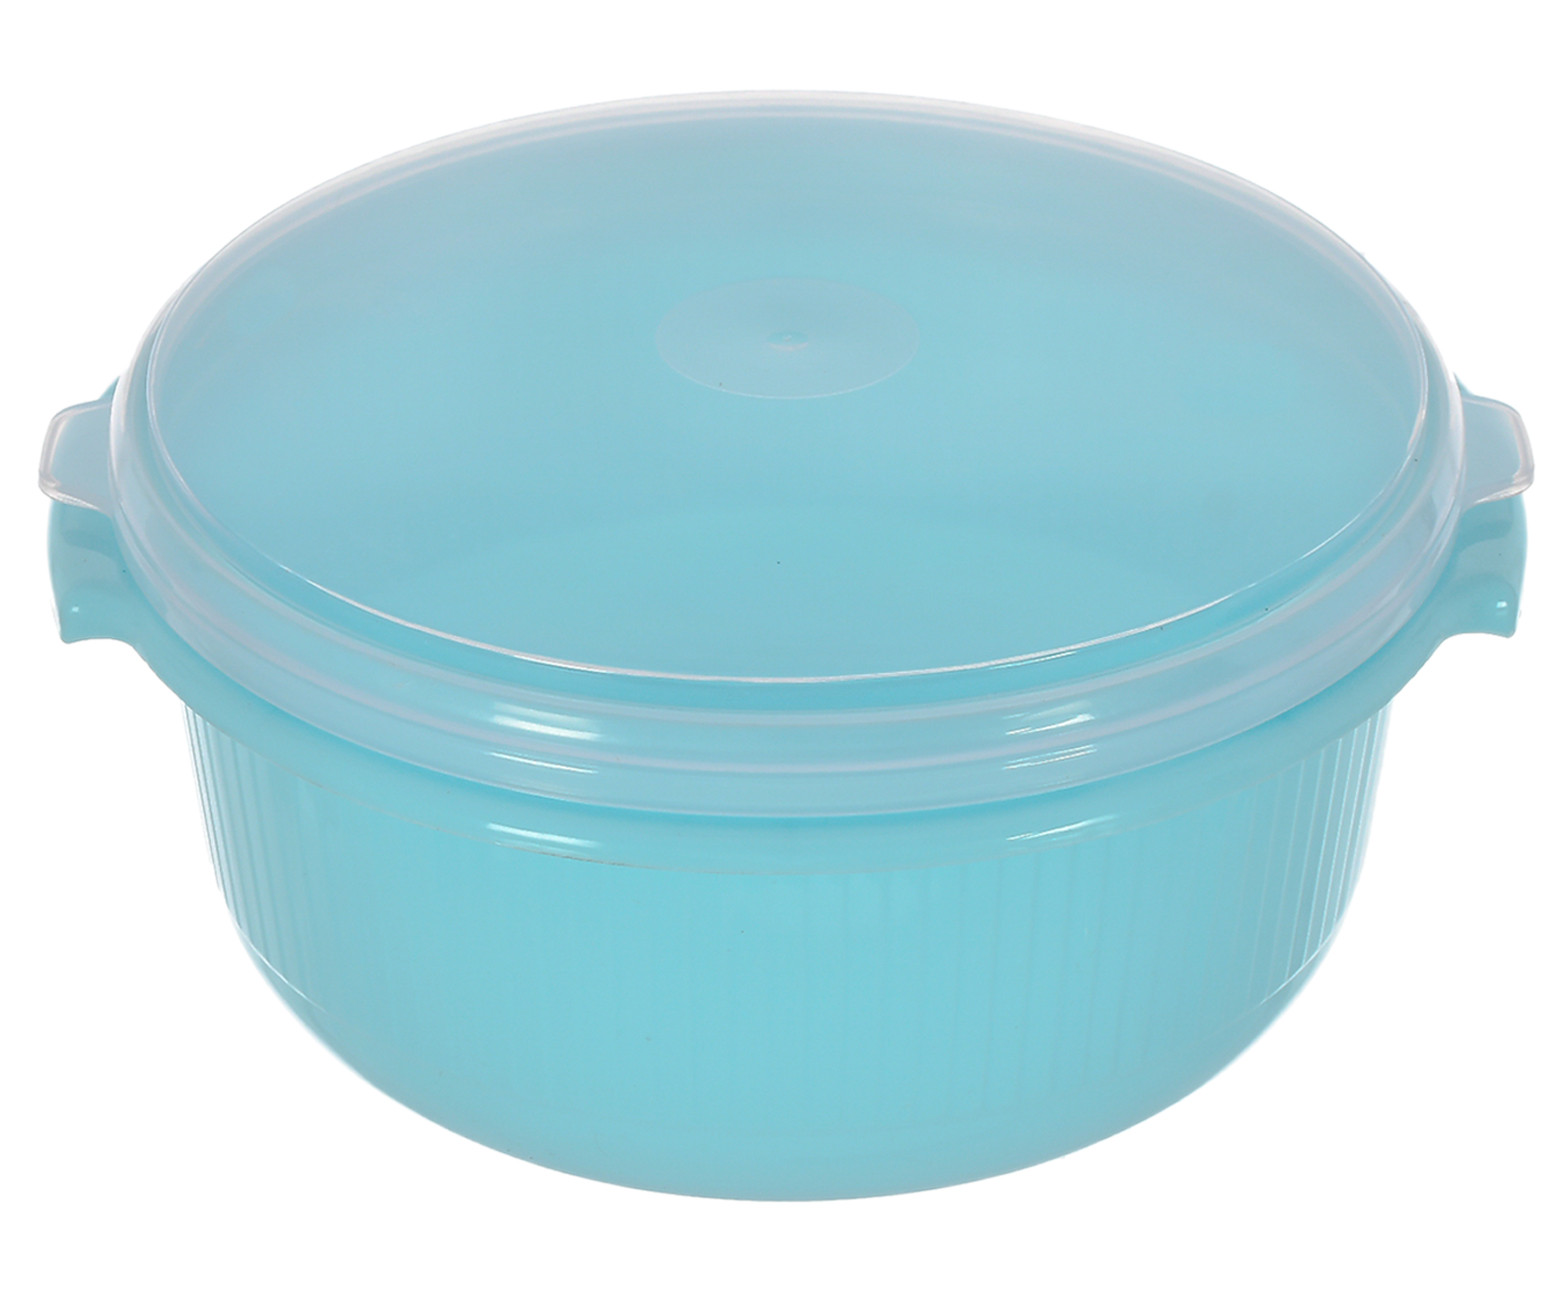 Kuber Industries 3 Piece Multiuses Plastic Serving/Mixing Bowls, Food Storage Containers Set With Lid, (3200ml, 1800ml, 1000ml) (Blue)-46KM0321